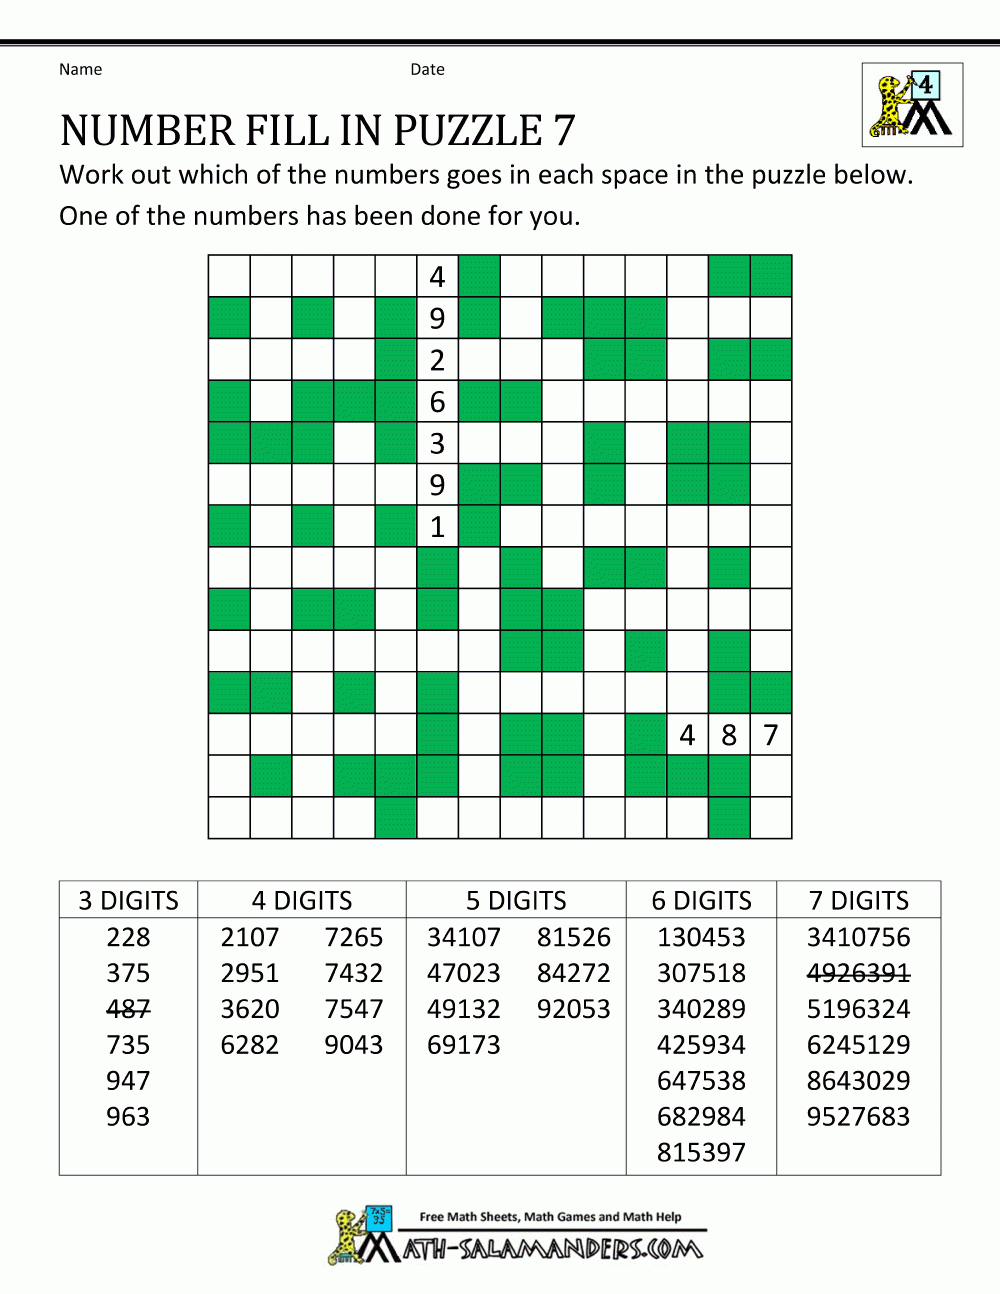 Number Fill In Puzzles - Free Printable Crossword Puzzle #3